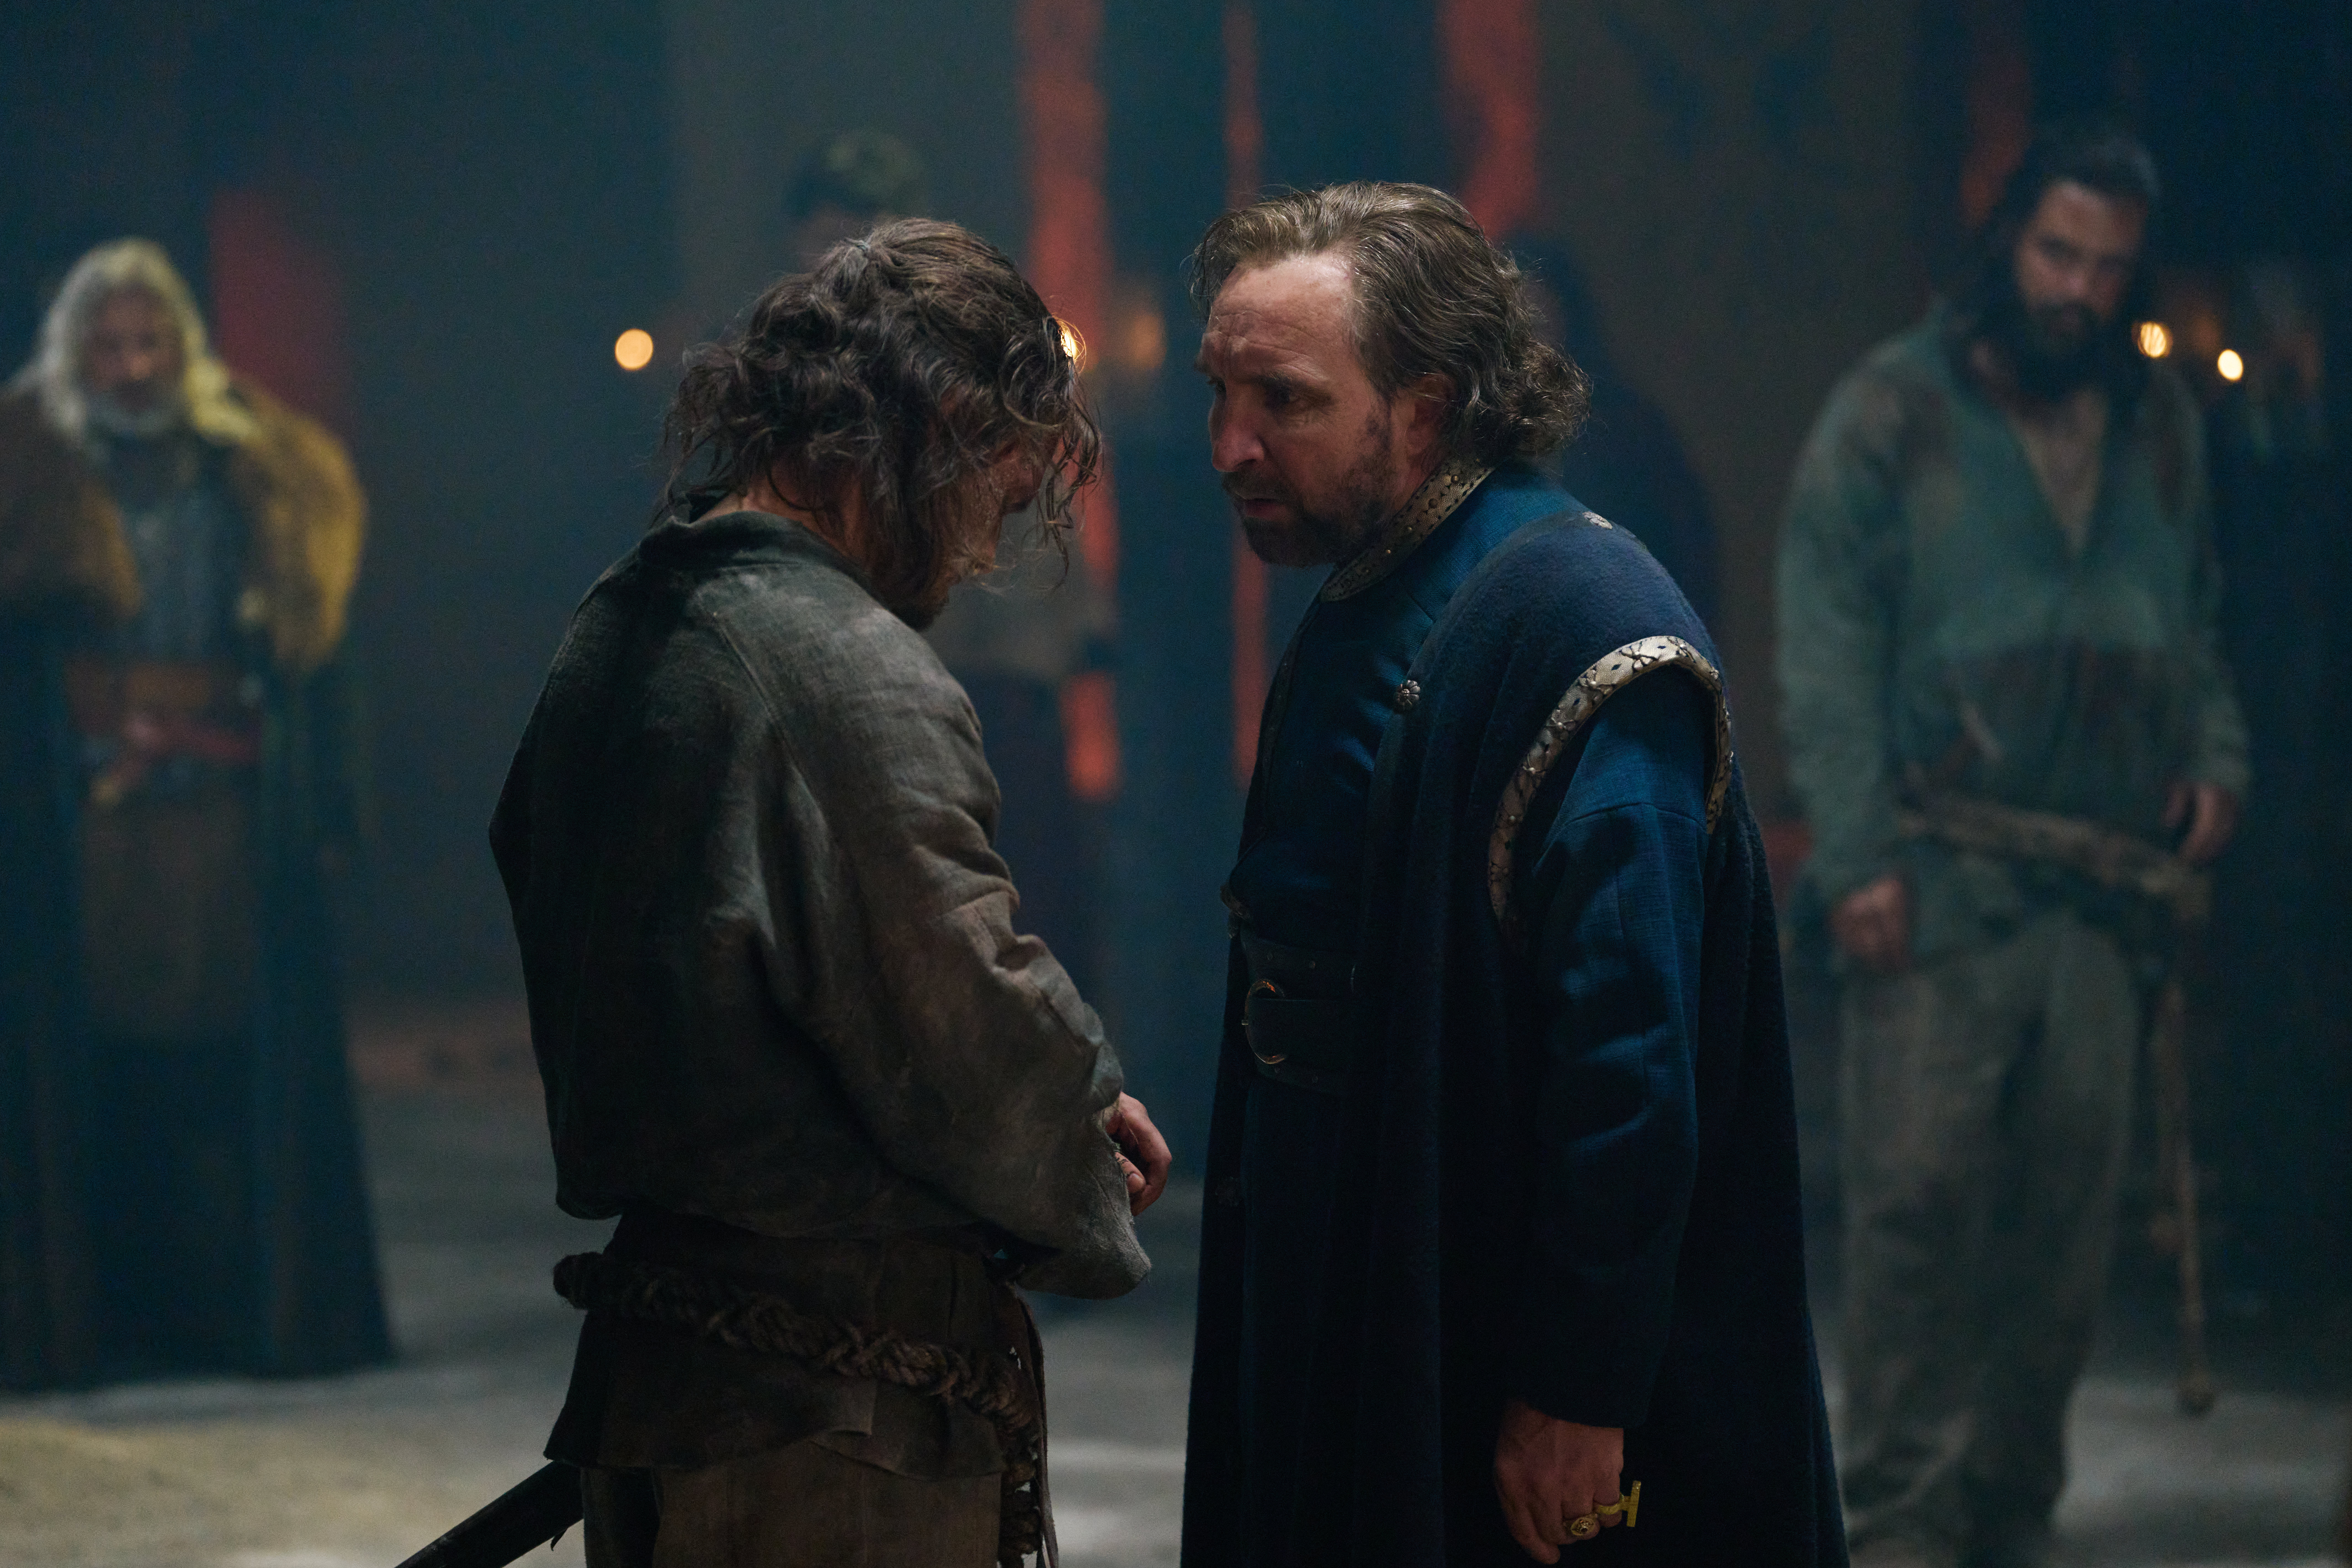 HD wallpaper featuring a scene with two characters from 'The Winter King', one, possibly Eddie Marsan, in a blue cloak engaging with another in a grim, medieval setting.